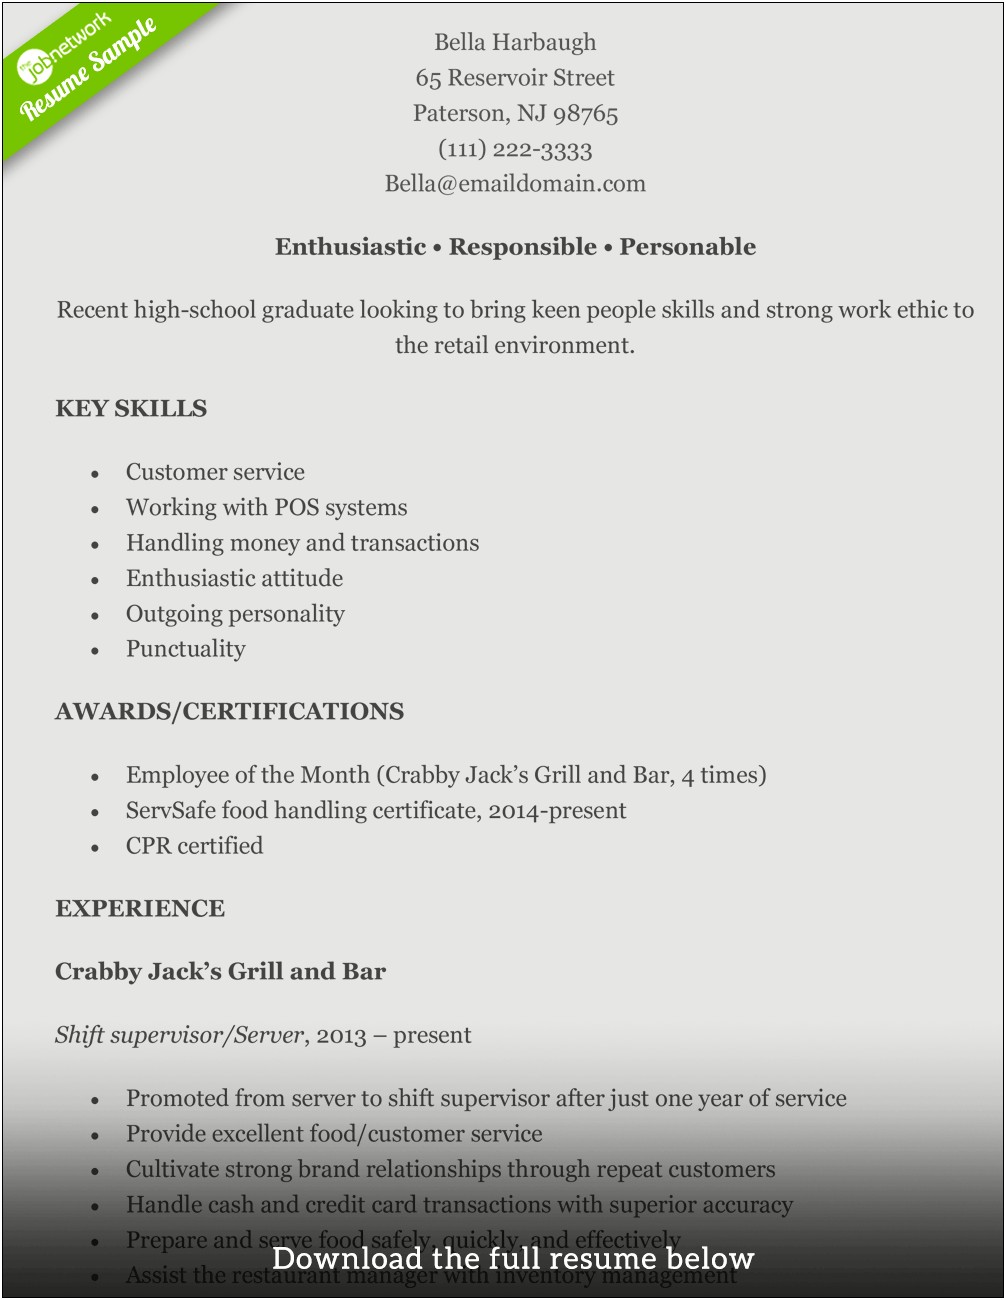 Sales Experience Resume Free Download